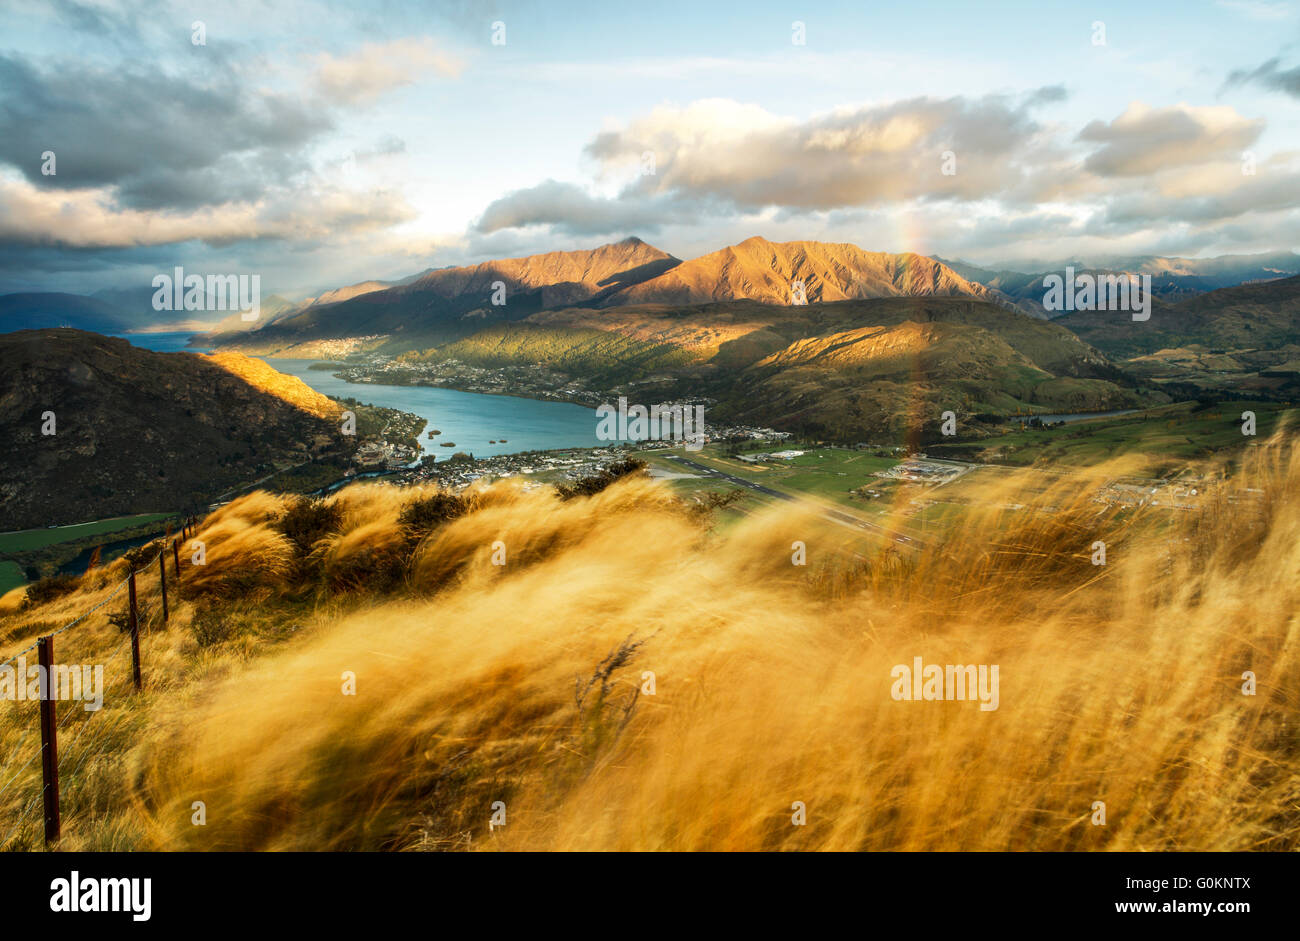 The view of Queenstown from The Remarkables, Queenstown, New Zealand. Stock Photo